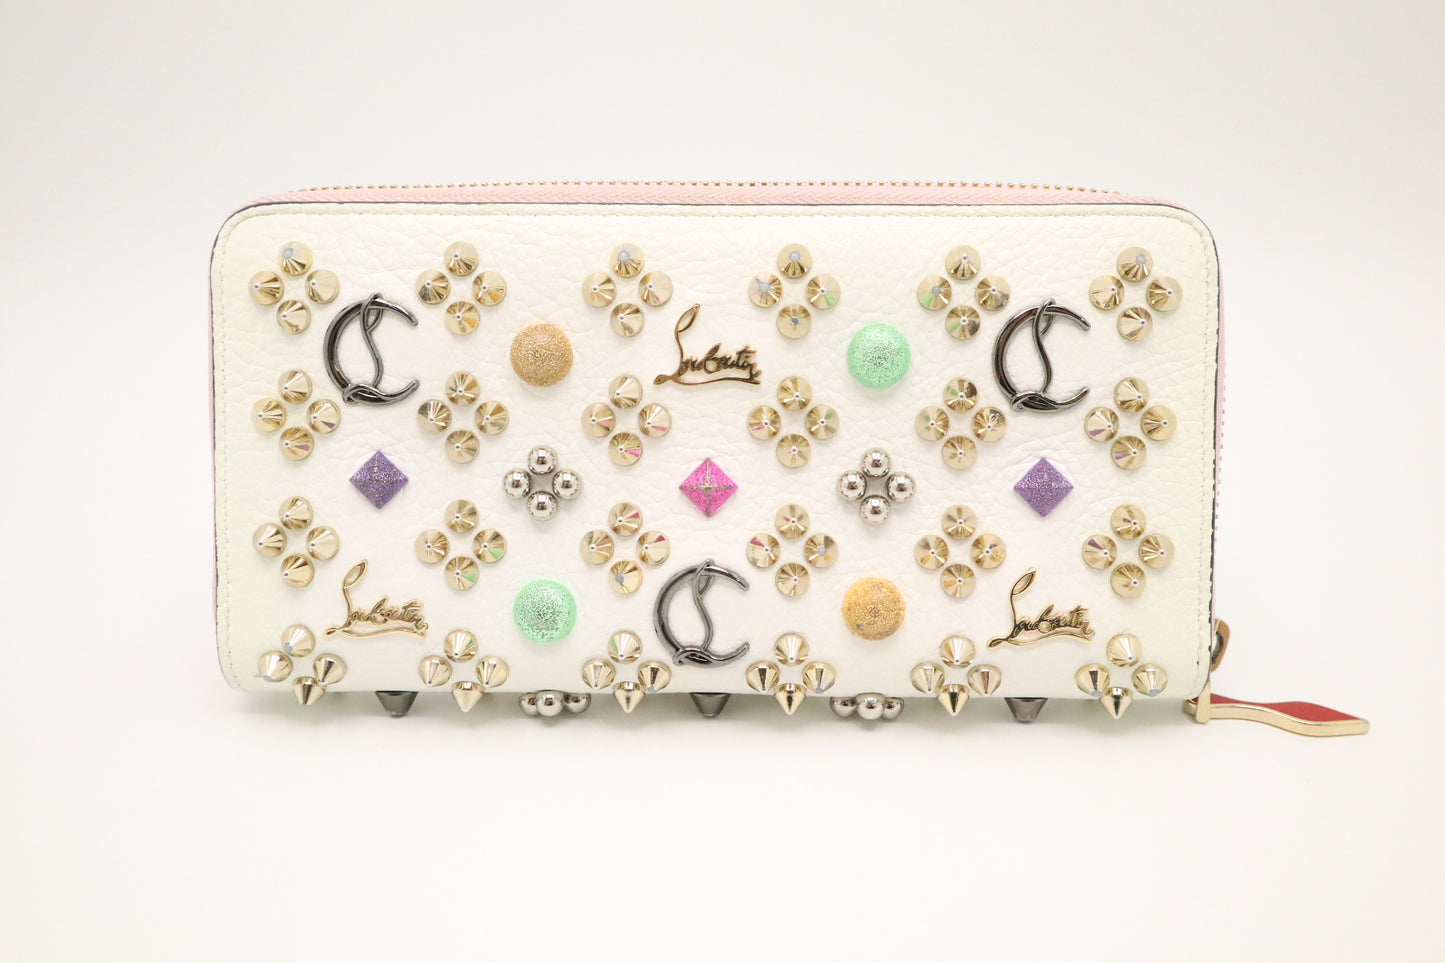 Louboutin Panettone Wallet in White Loubinthesky Spiked Leather